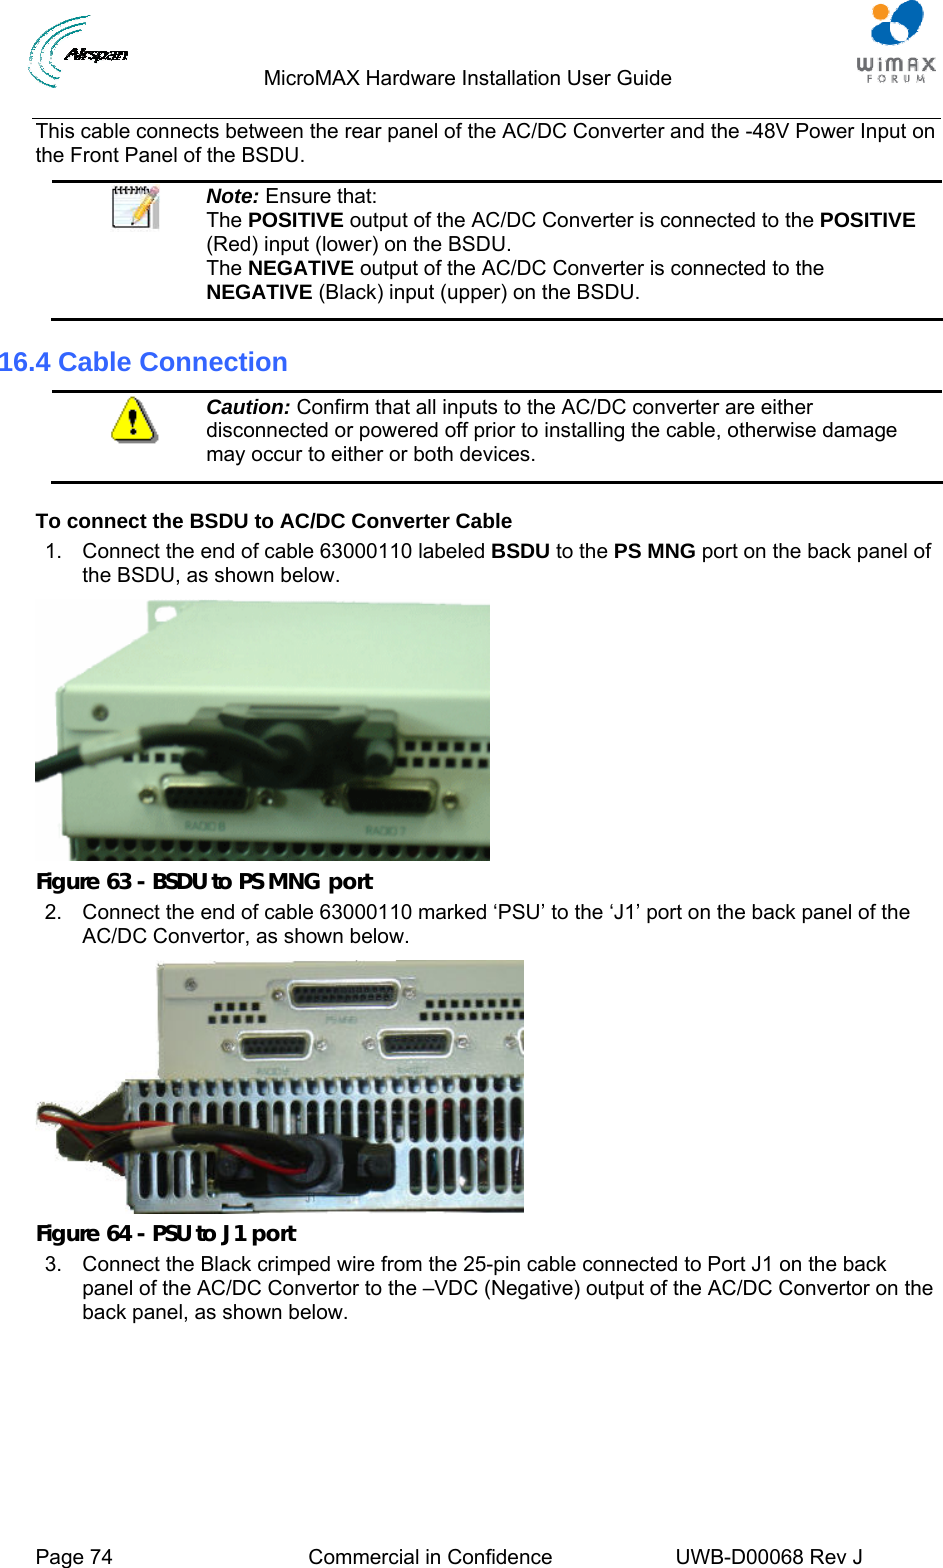                                  MicroMAX Hardware Installation User Guide     Page 74  Commercial in Confidence  UWB-D00068 Rev J   This cable connects between the rear panel of the AC/DC Converter and the -48V Power Input on the Front Panel of the BSDU.  Note: Ensure that:  The POSITIVE output of the AC/DC Converter is connected to the POSITIVE (Red) input (lower) on the BSDU. The NEGATIVE output of the AC/DC Converter is connected to the NEGATIVE (Black) input (upper) on the BSDU. 16.4 Cable Connection  Caution: Confirm that all inputs to the AC/DC converter are either disconnected or powered off prior to installing the cable, otherwise damage may occur to either or both devices.  To connect the BSDU to AC/DC Converter Cable 1.  Connect the end of cable 63000110 labeled BSDU to the PS MNG port on the back panel of the BSDU, as shown below.  Figure 63 - BSDU to PS MNG port 2.  Connect the end of cable 63000110 marked ‘PSU’ to the ‘J1’ port on the back panel of the AC/DC Convertor, as shown below.  Figure 64 - PSU to J1 port 3.  Connect the Black crimped wire from the 25-pin cable connected to Port J1 on the back panel of the AC/DC Convertor to the –VDC (Negative) output of the AC/DC Convertor on the back panel, as shown below. 